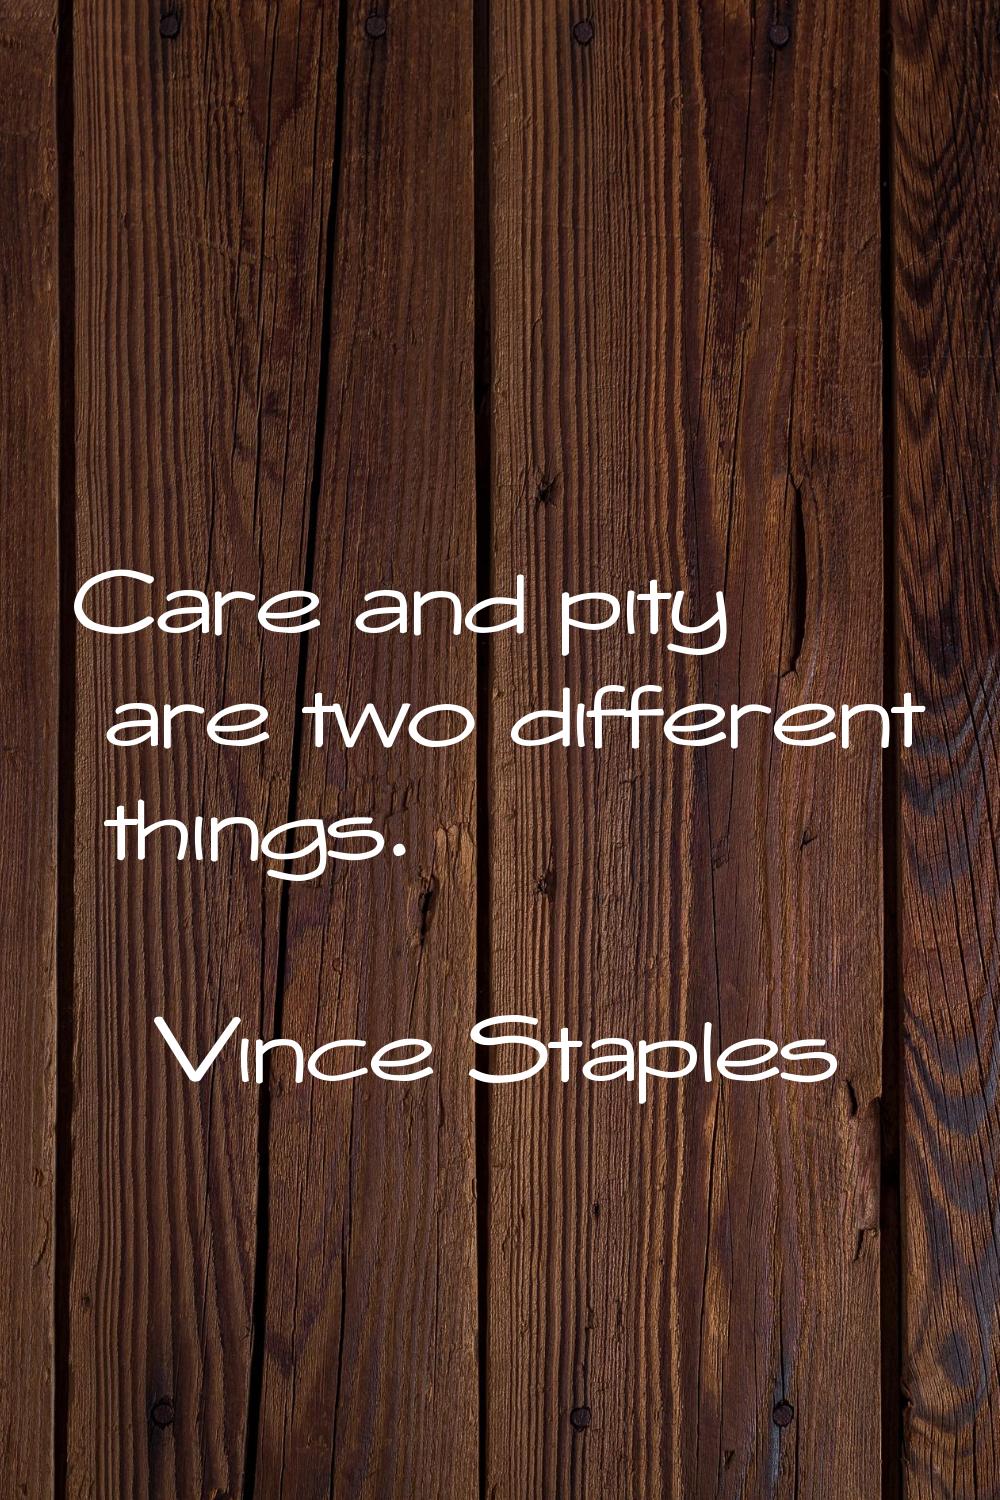 Care and pity are two different things.